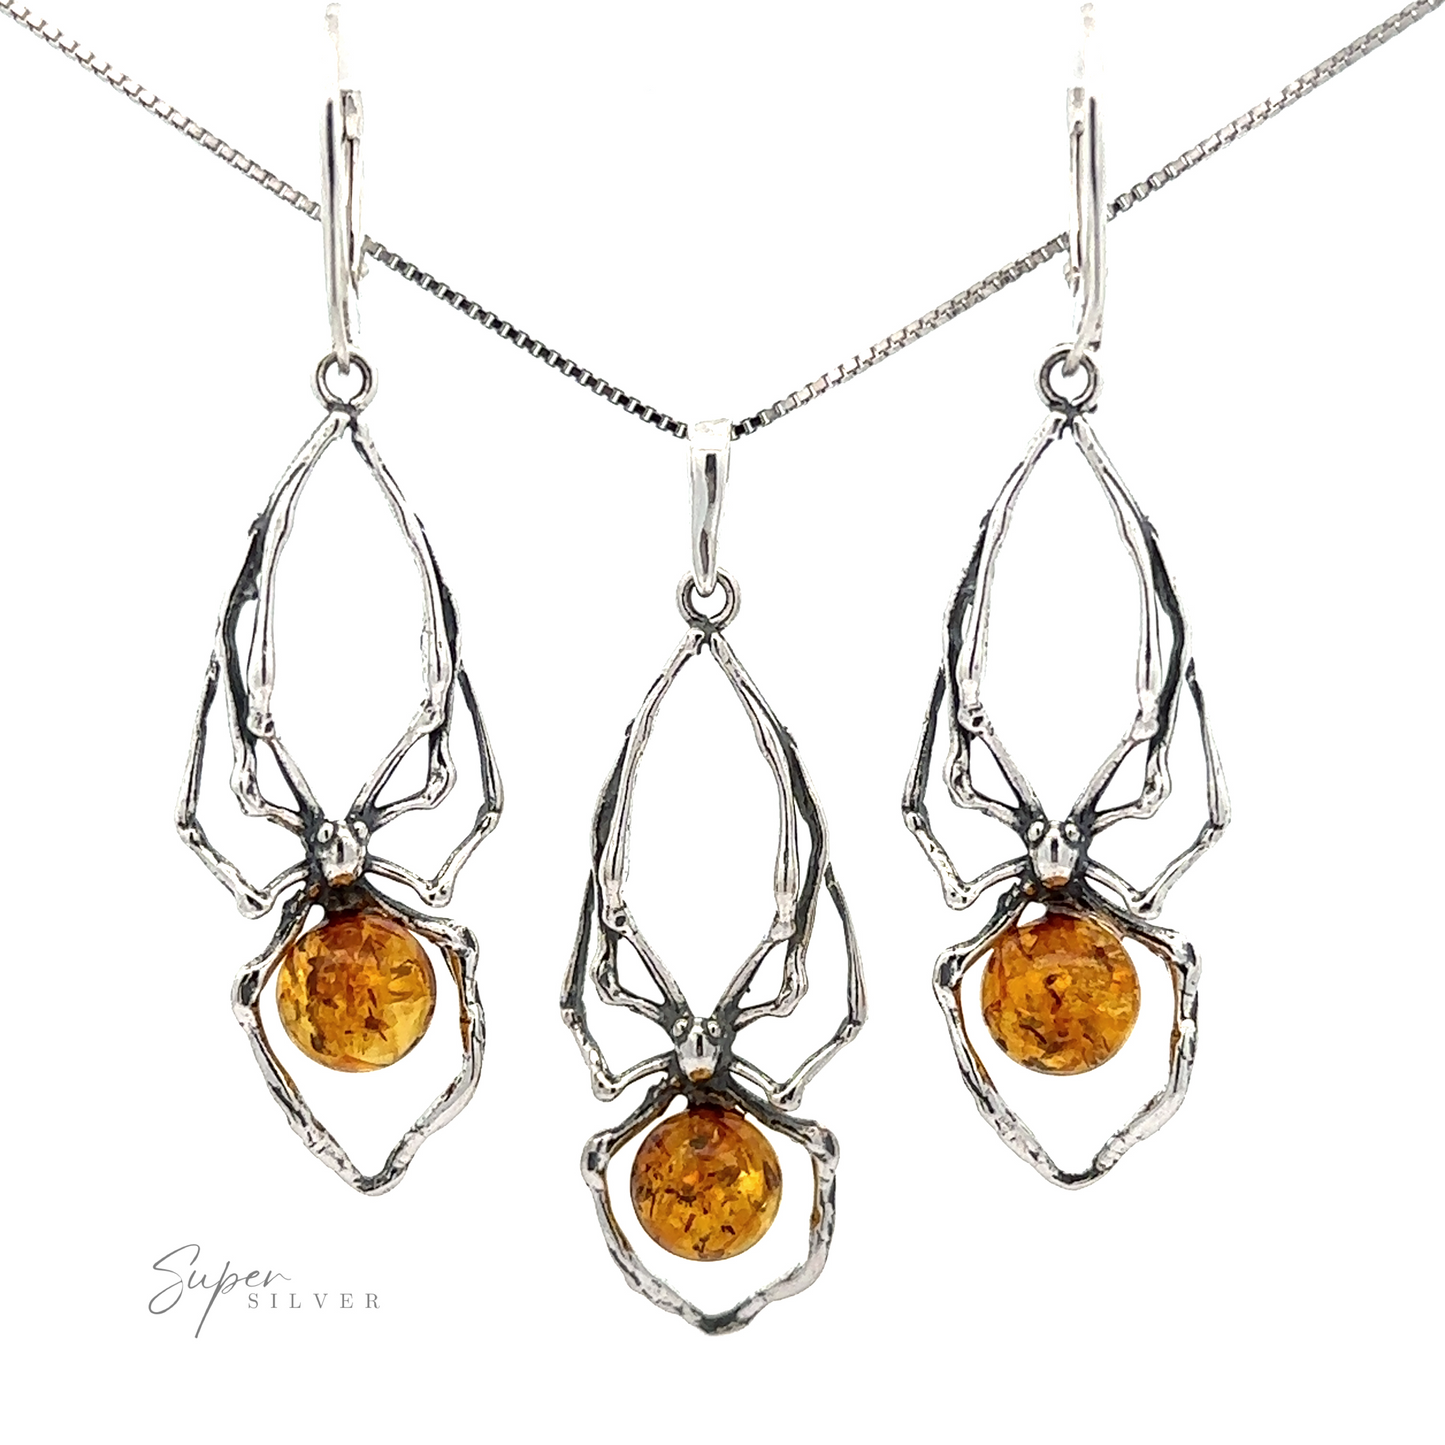 A set of sterling silver Beautiful Amber Spider Pendant jewelry with Baltic amber stones, including a spider pendant and a pair of earrings.